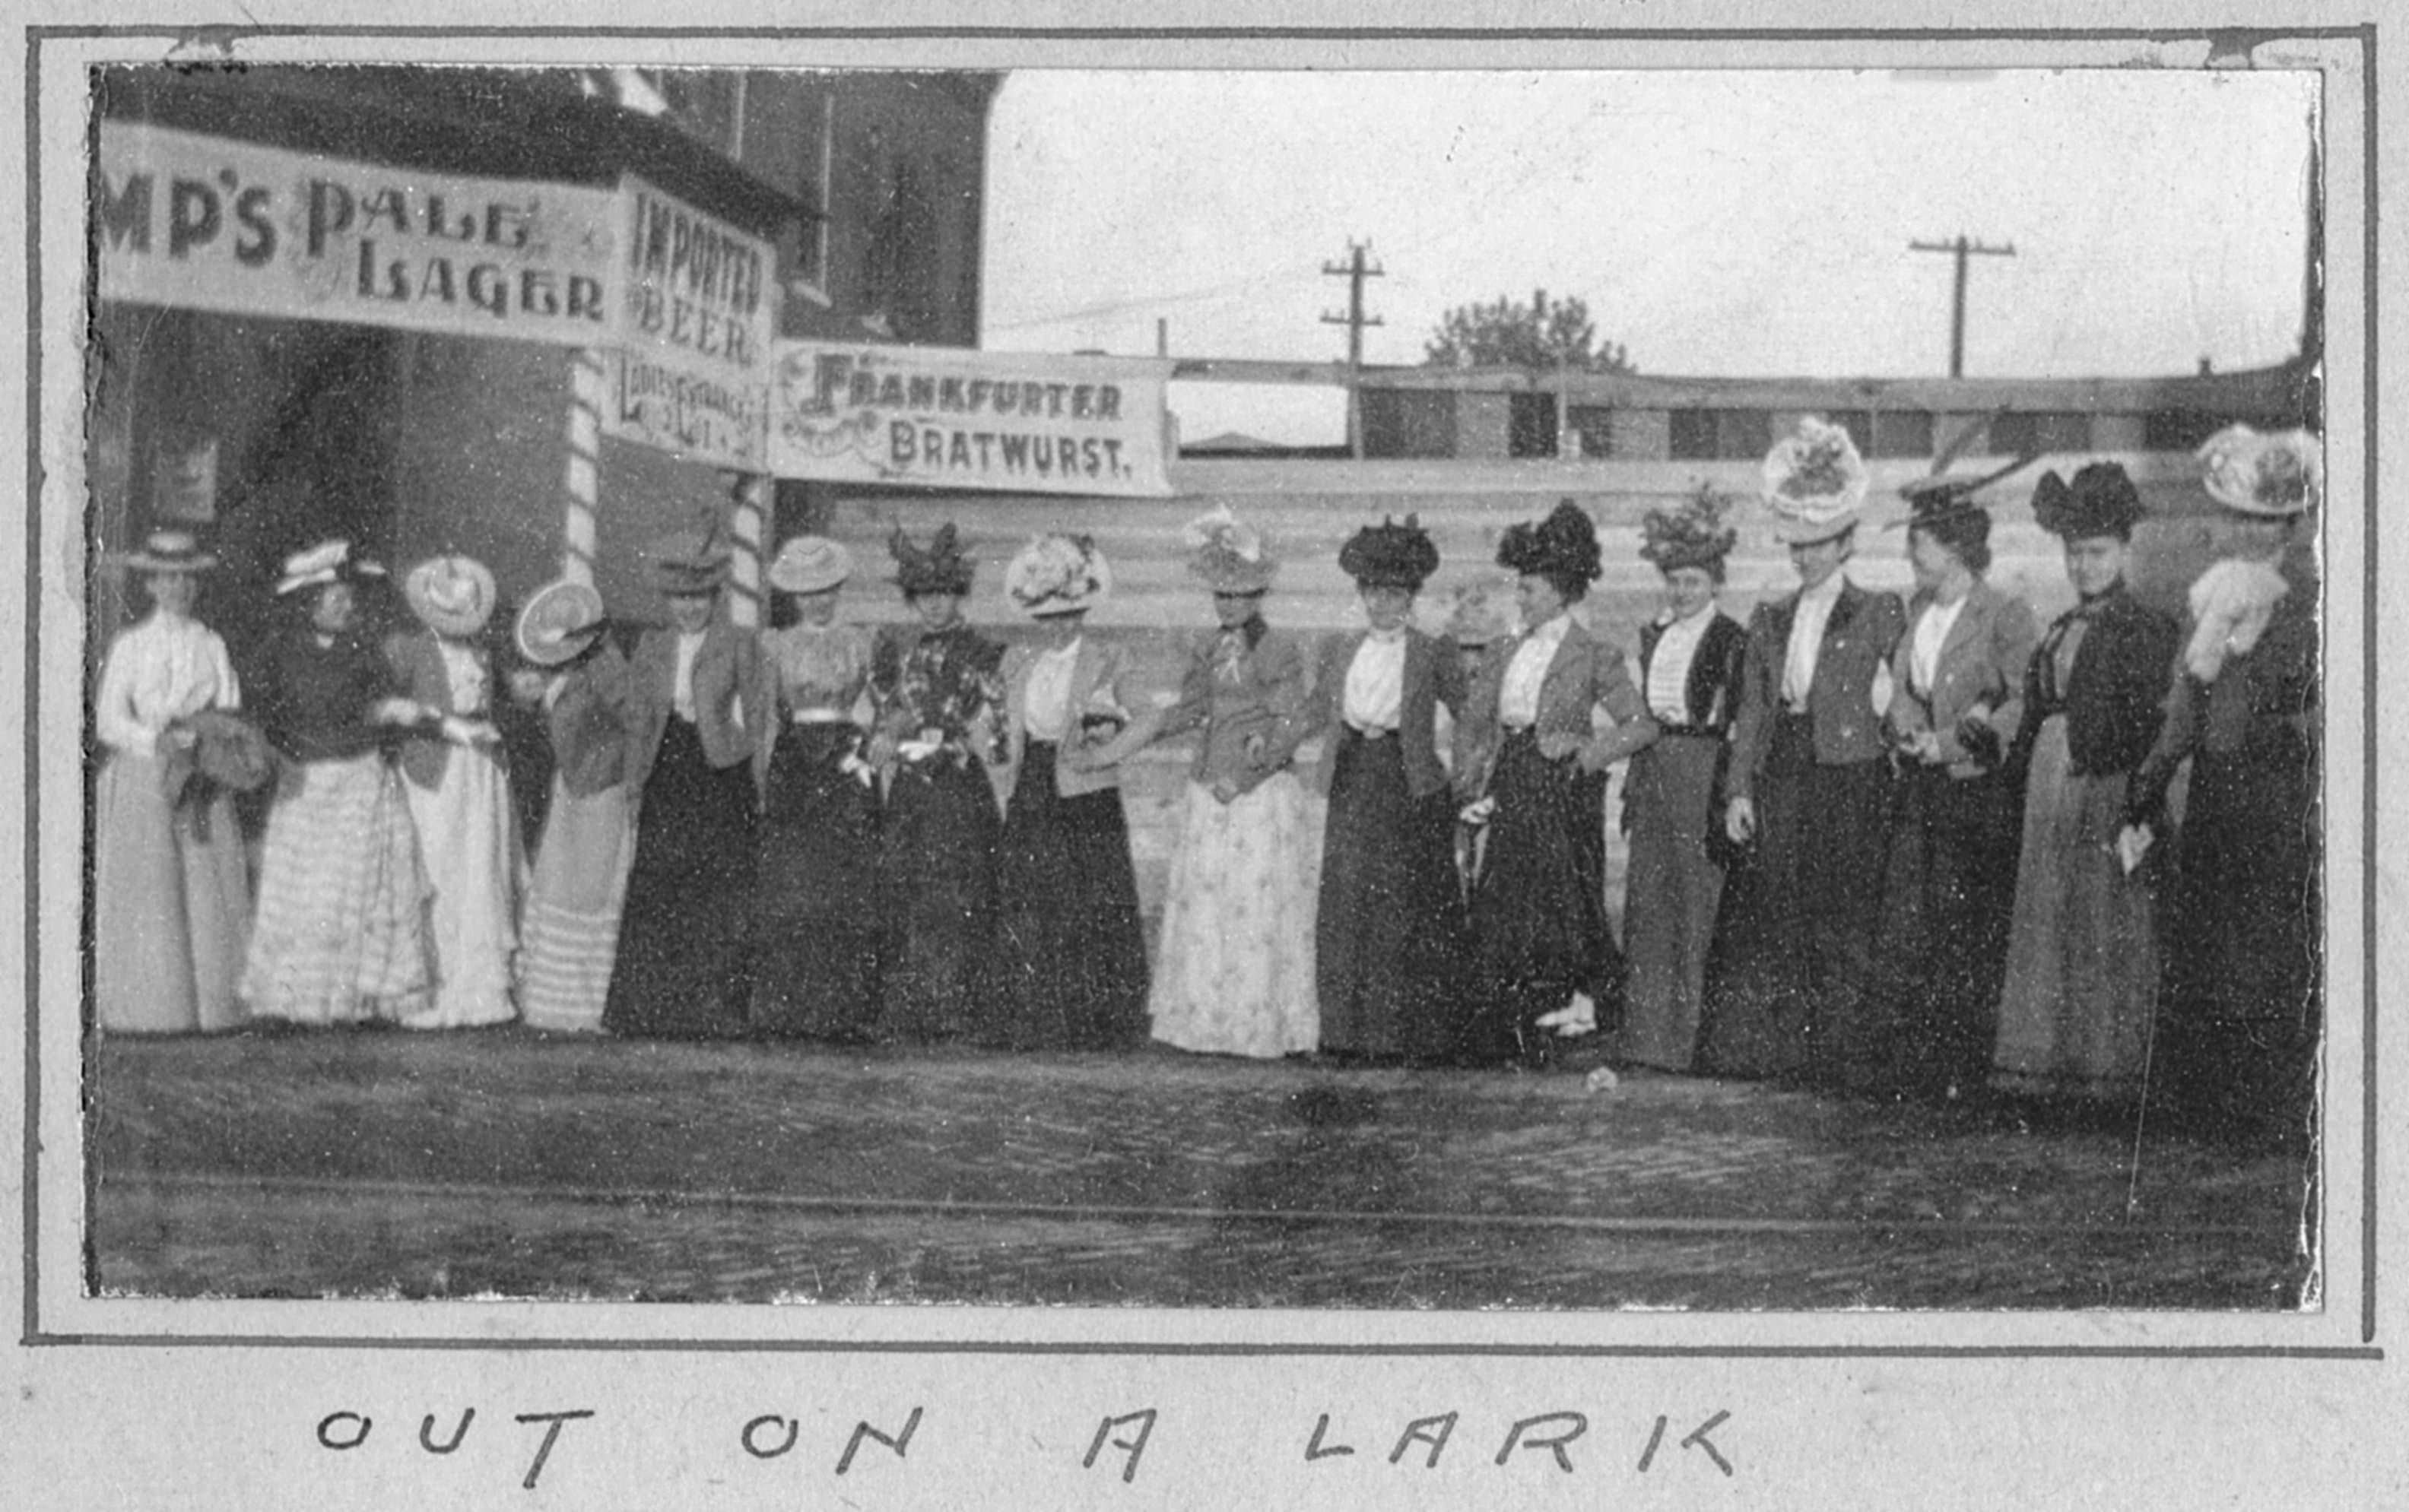 At the ladies entrance of the Belleville Downtown Saloon (Pale lager, imported beer, frankfurters and bratwurst). The photo was taken at the Belleville, Illinois, town fair in 1901.

Photo taken by Samuel Peake Hyde, b. Feb 17, 1850, St. Francisville, Clark, Missouri; d. April 28, 1921, Belleville, St. Clair, Illinois., son of Edwin C. Hyde and Elizabeth Hyde. Samuel was a clerk for J. G. Green Company, 1867, and then worked with his father at E.C. Hyde & Co., Storage and Commission, 4 South Commercial Street, Belleville, IL. Sam resided at 37 North Douglas, Belleville.
